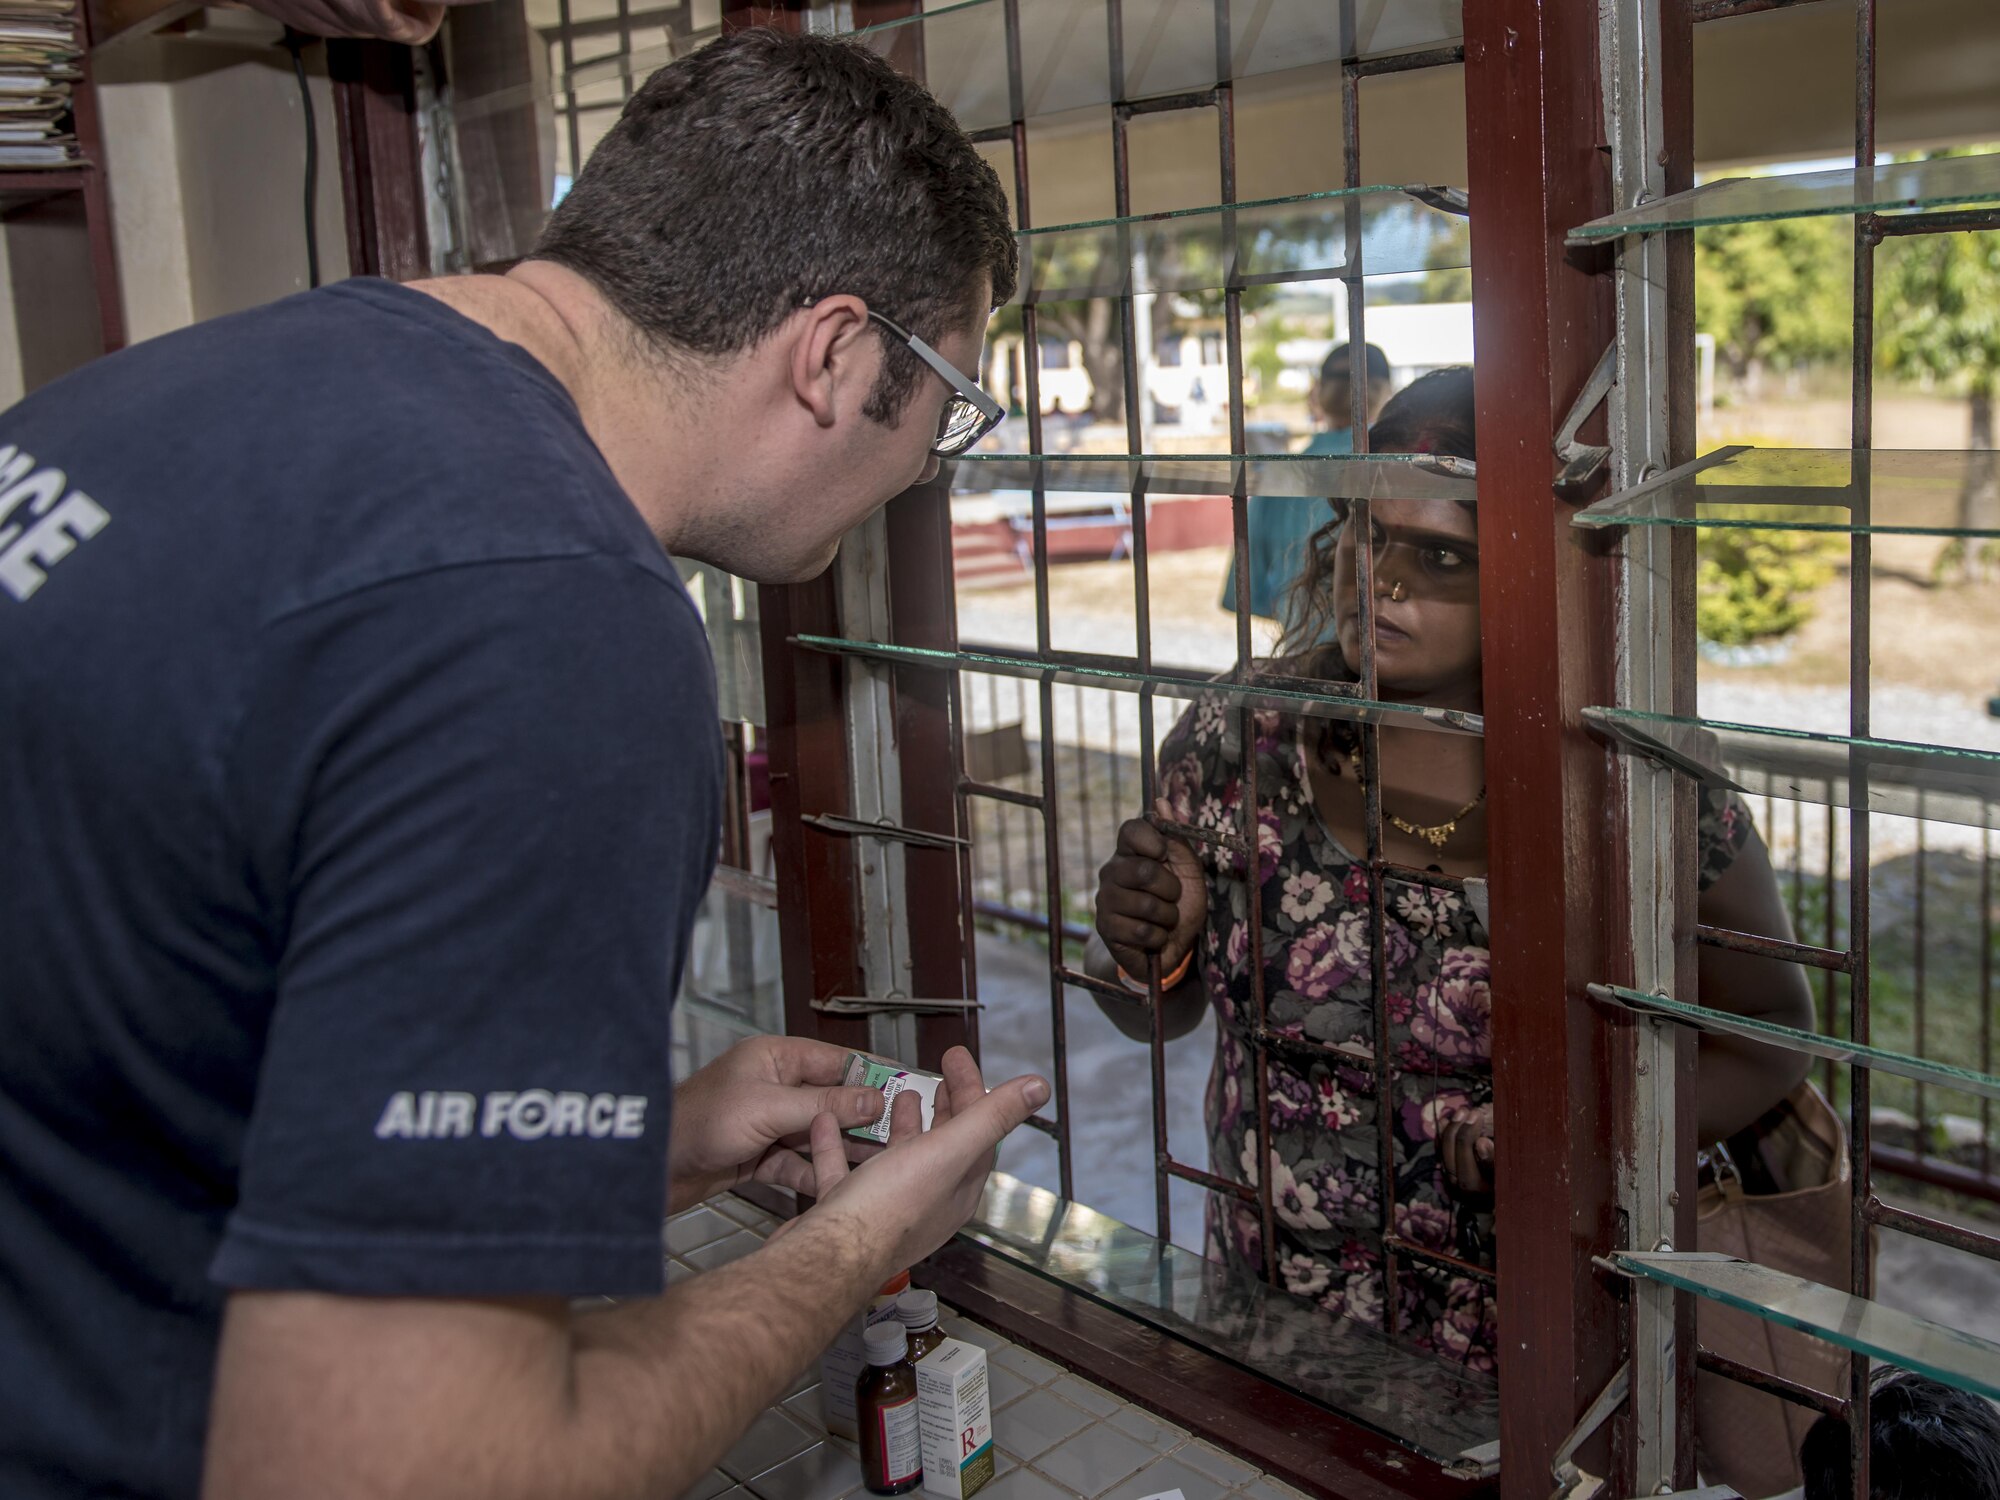 Royal Australian Air Force (RAAF) Flying Officer Luke Laws, left, a pharmaceutical officer with the 3rd Aeromedical Evacuation Squadron at RAAF Base Richmond, Australia, explains to a patient how to administer her medicine during Pacific Angel 17-3 at Tagitagi Sangam School and Kindergarten in Tavua, Fiji, July 20, 2017. The Australians were joined by four other regional nations including Vanuatu, Indonesia, the Philippines and France, aside from the U.S. and Fiji combining to provide humanitarian assistance and civil military operations, promoting regional military-civilian-nongovernmental organization cooperation and interoperability. (U.S. Air Force photo/Tech. Sgt. Benjamin W. Stratton)